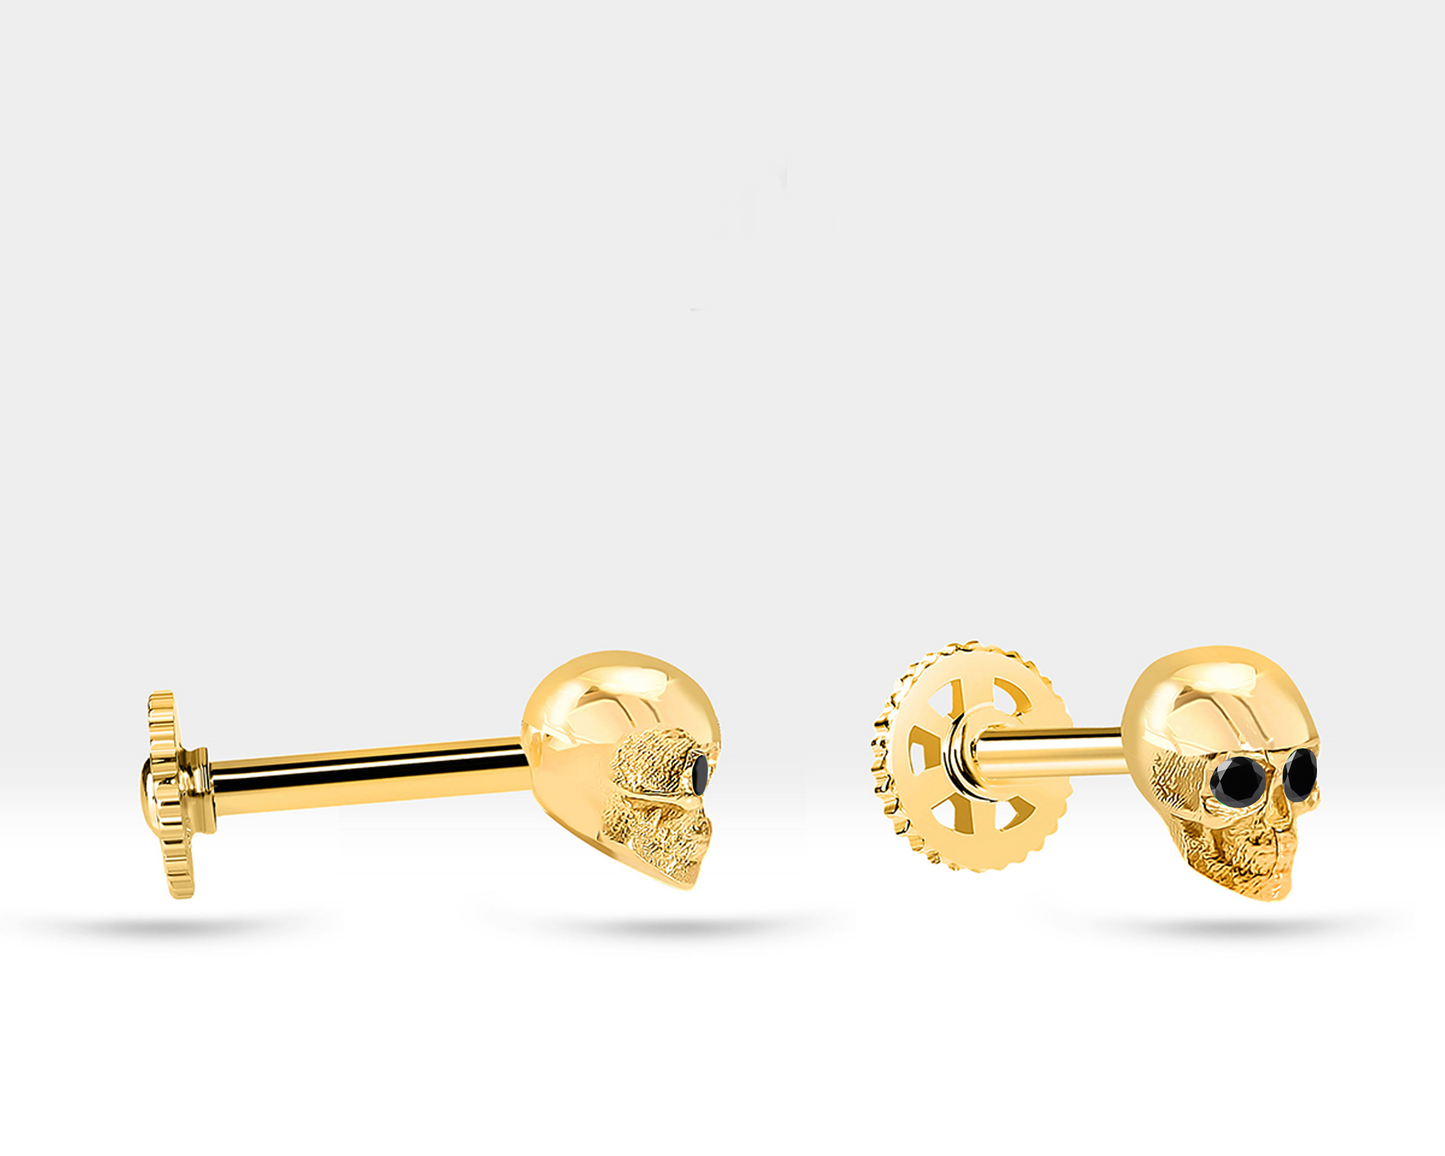 Skull Shaped Piercing with Black Diamond Tragus Piercing in 14K Yellow Solid Gold Helix 16G(1.2 mm),8mm Bar